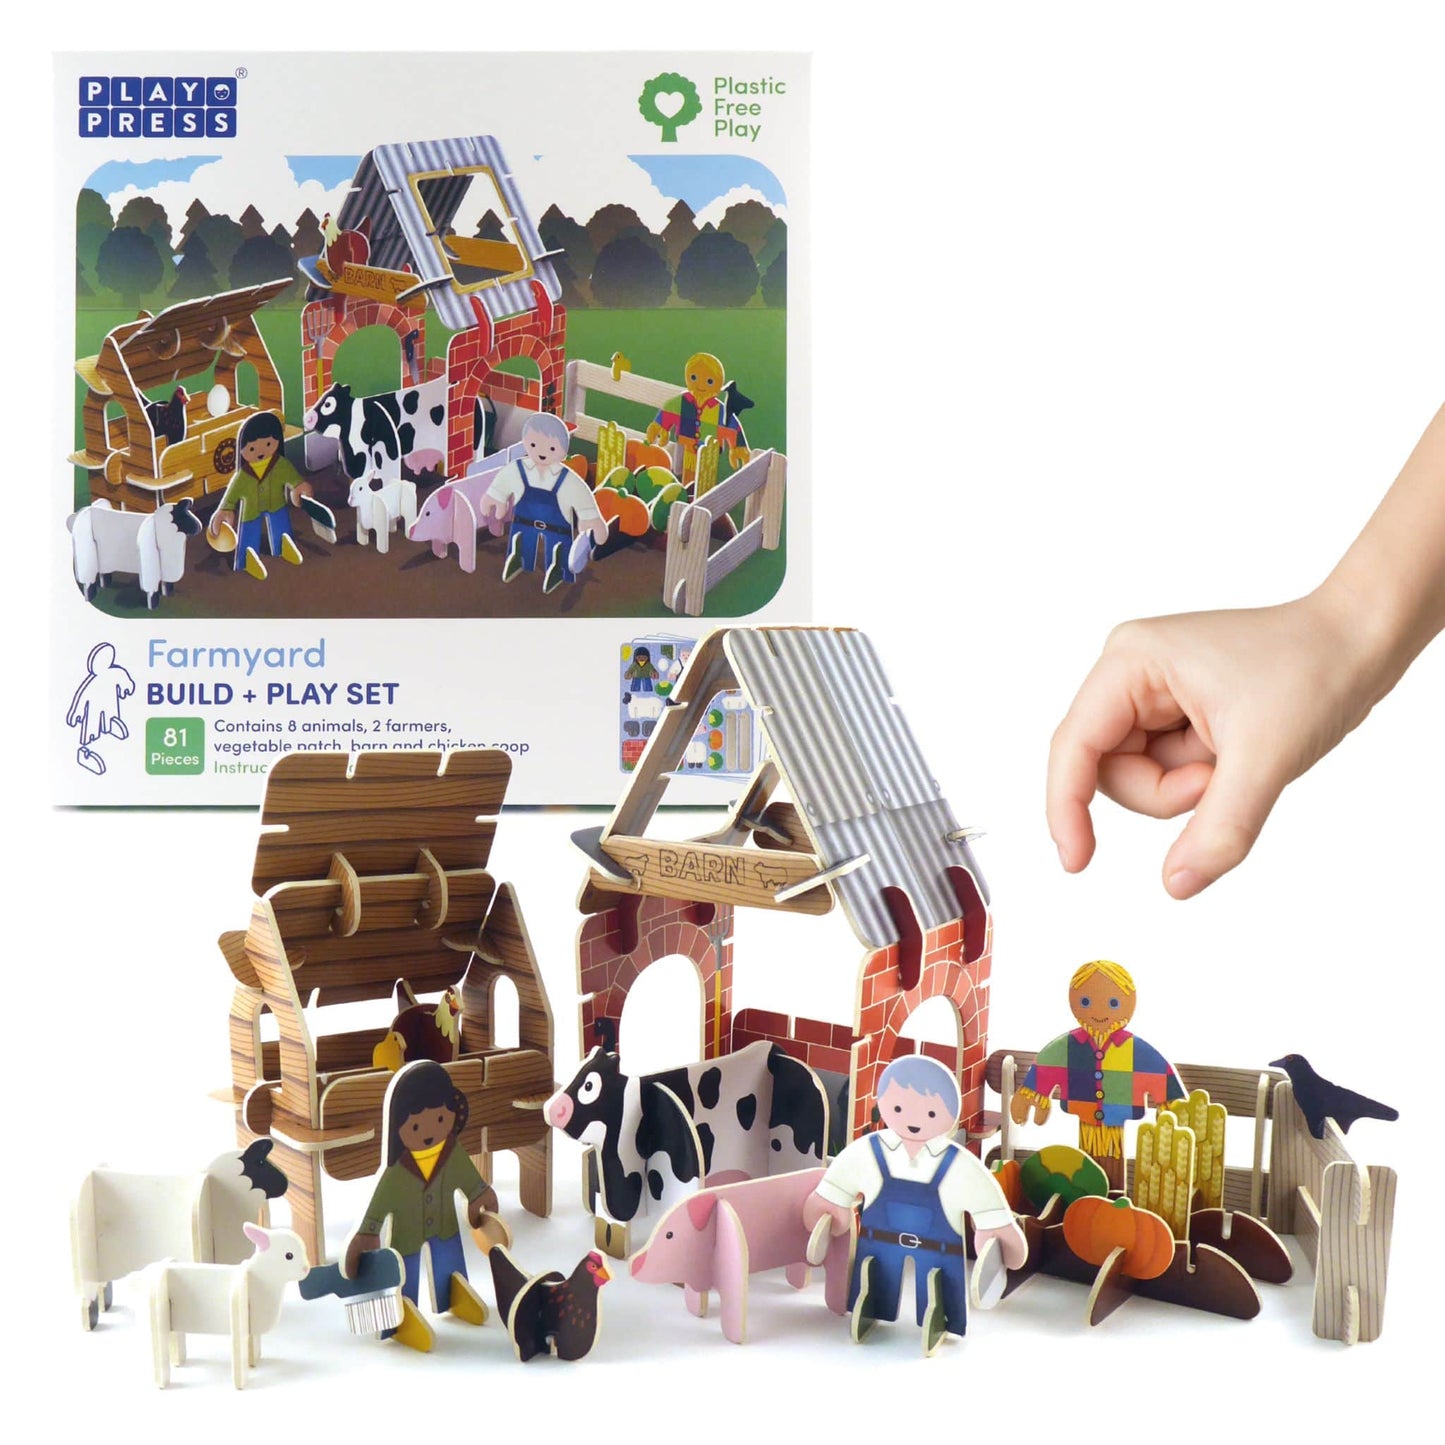 Build and Play Toy Farm Set - pack with hand